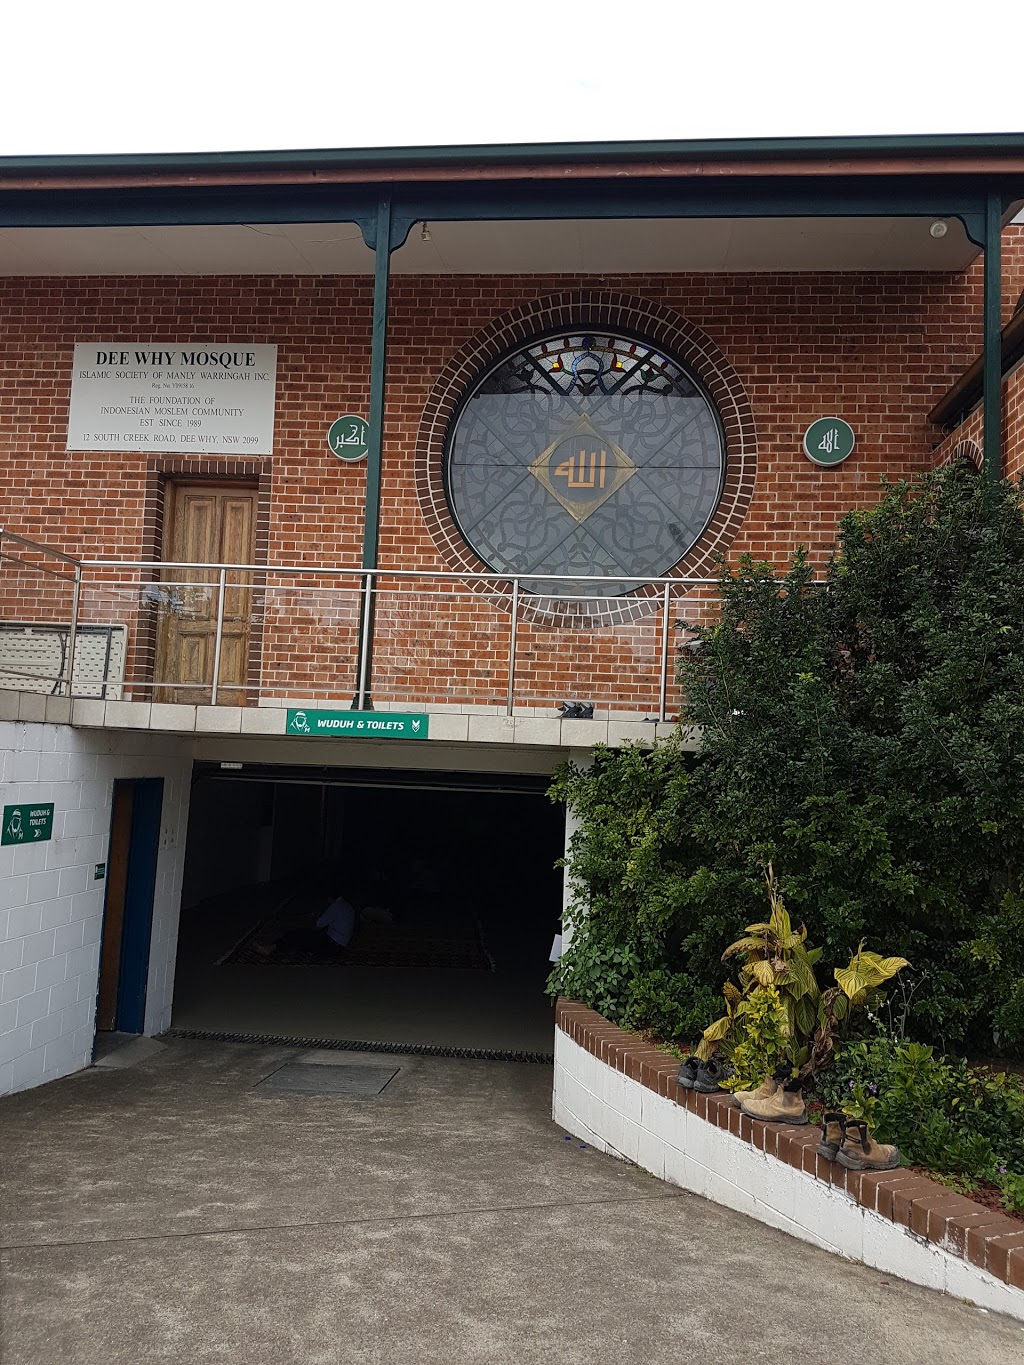 Dee Why Mosque | mosque | 12 S Creek Rd, Dee Why NSW 2099, Australia | 0299826102 OR +61 2 9982 6102